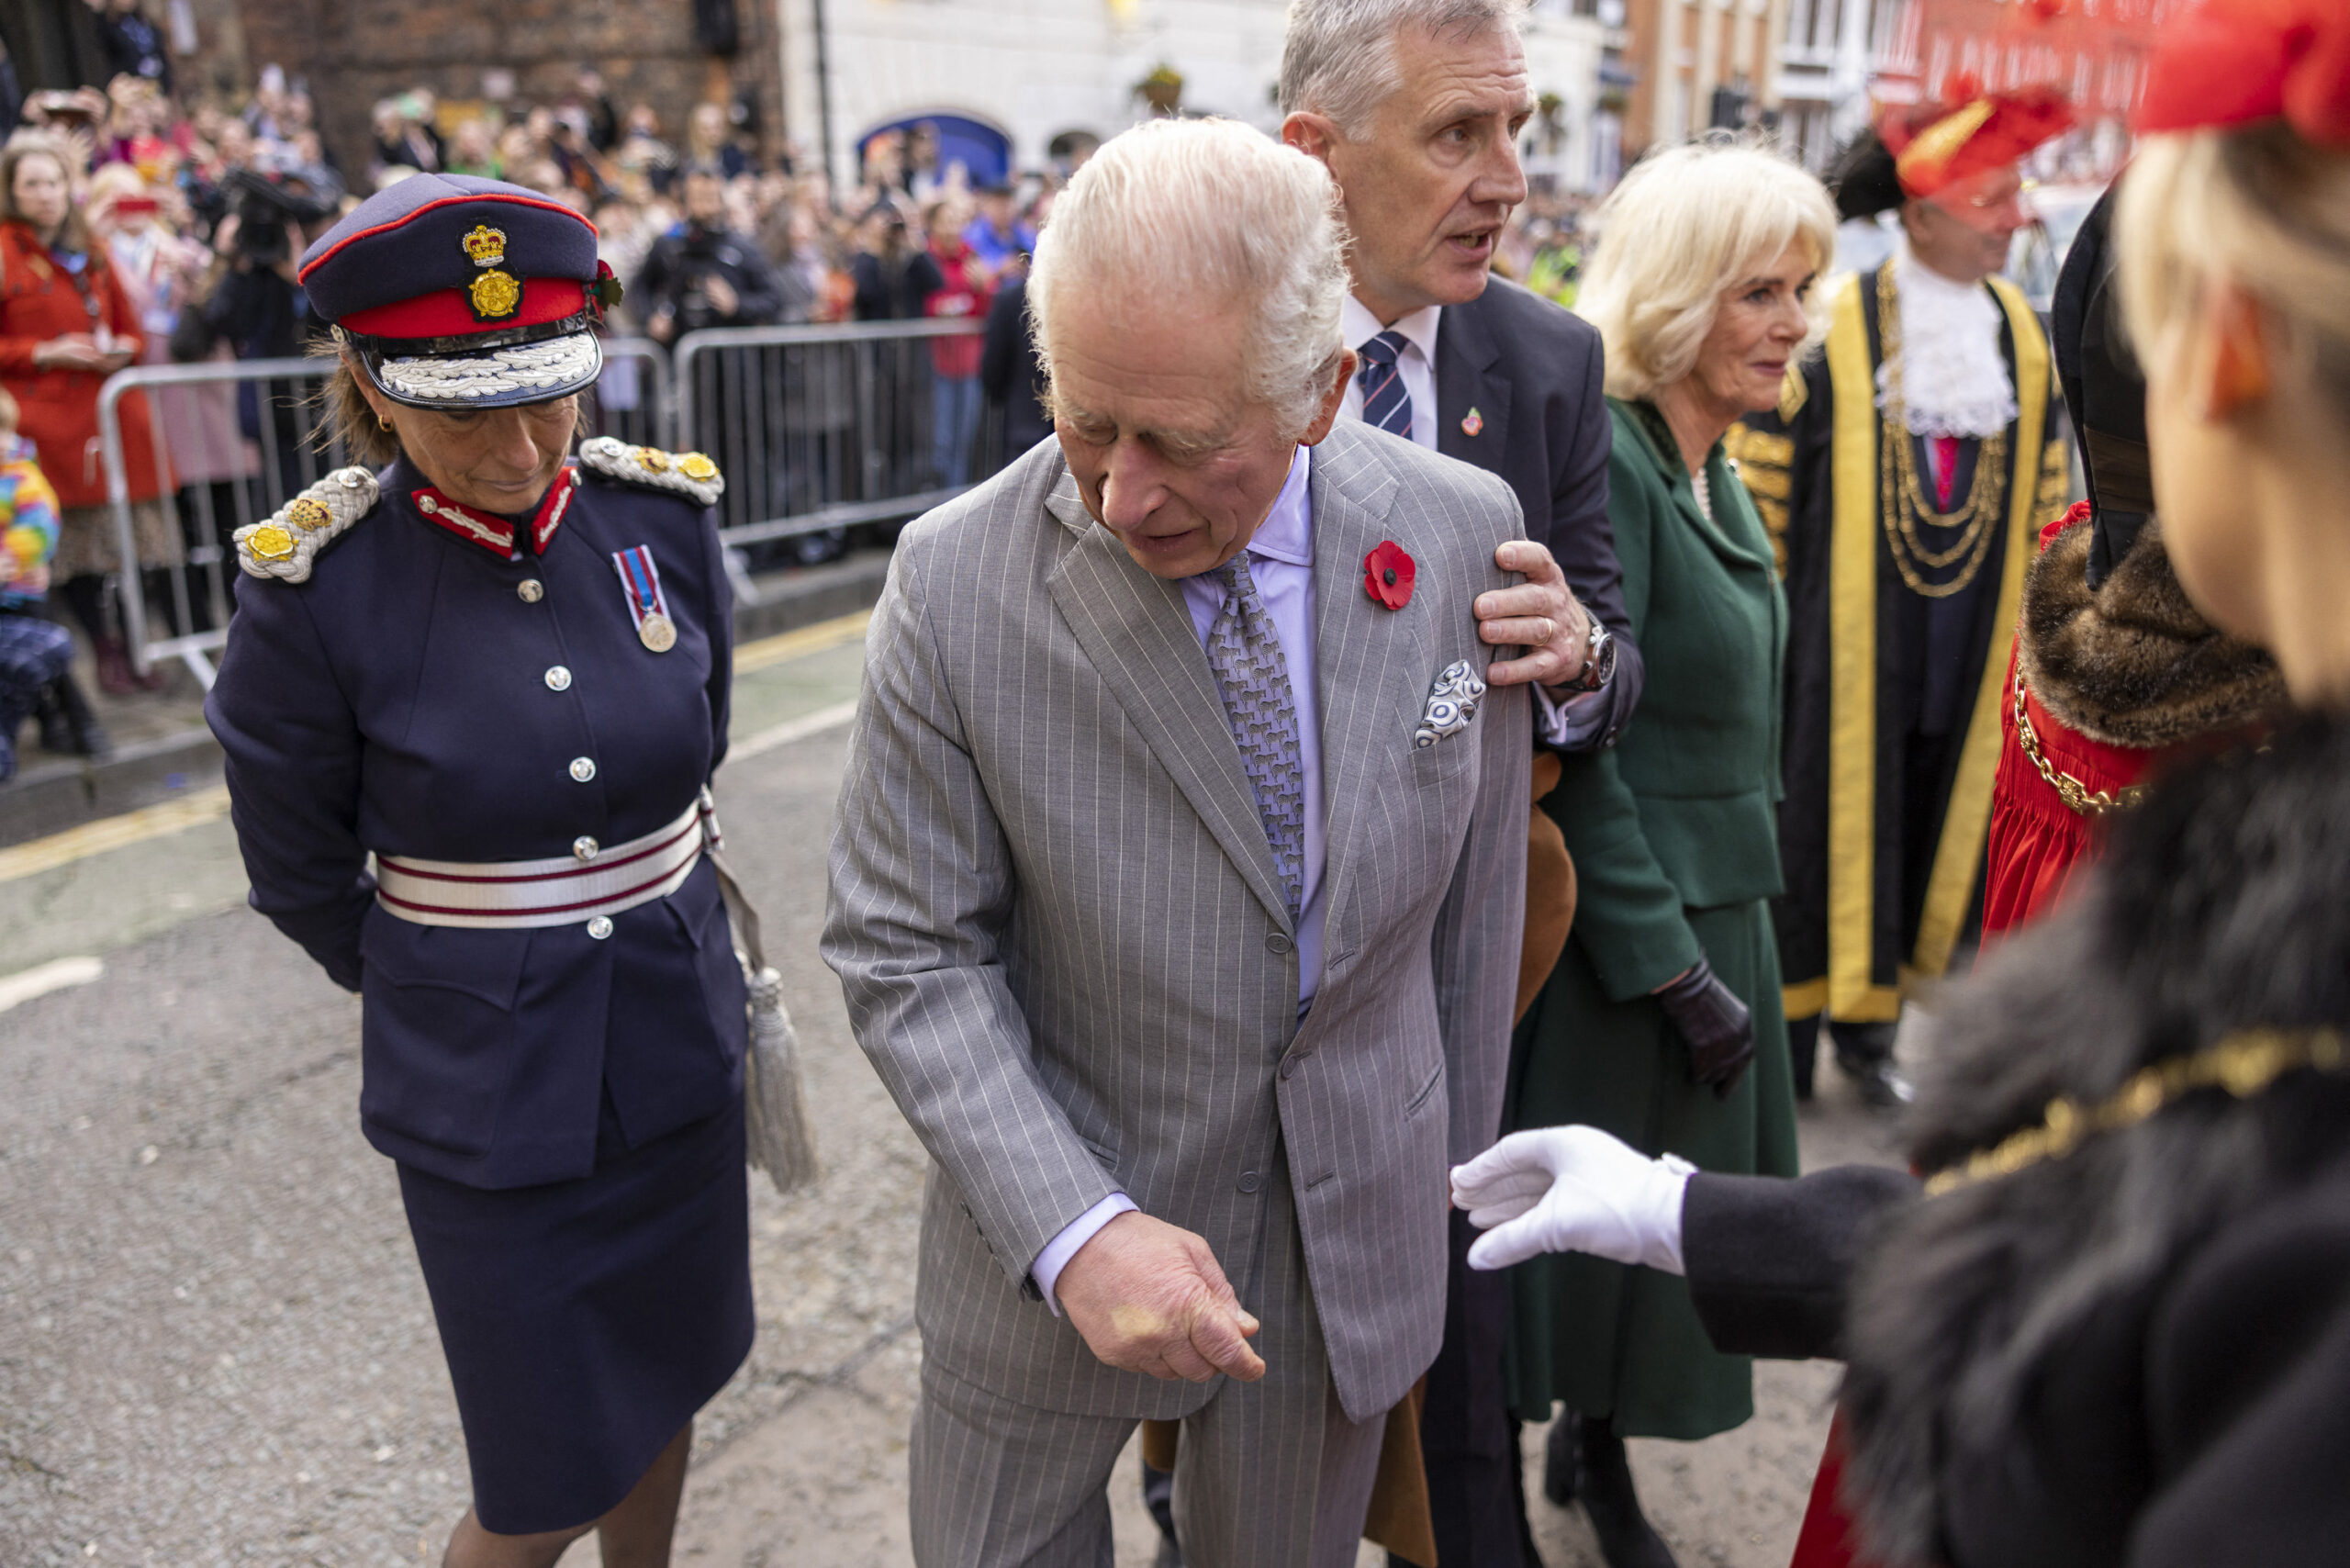 Man throws eggs at King Charles, Queen consort in York, detained | Watch